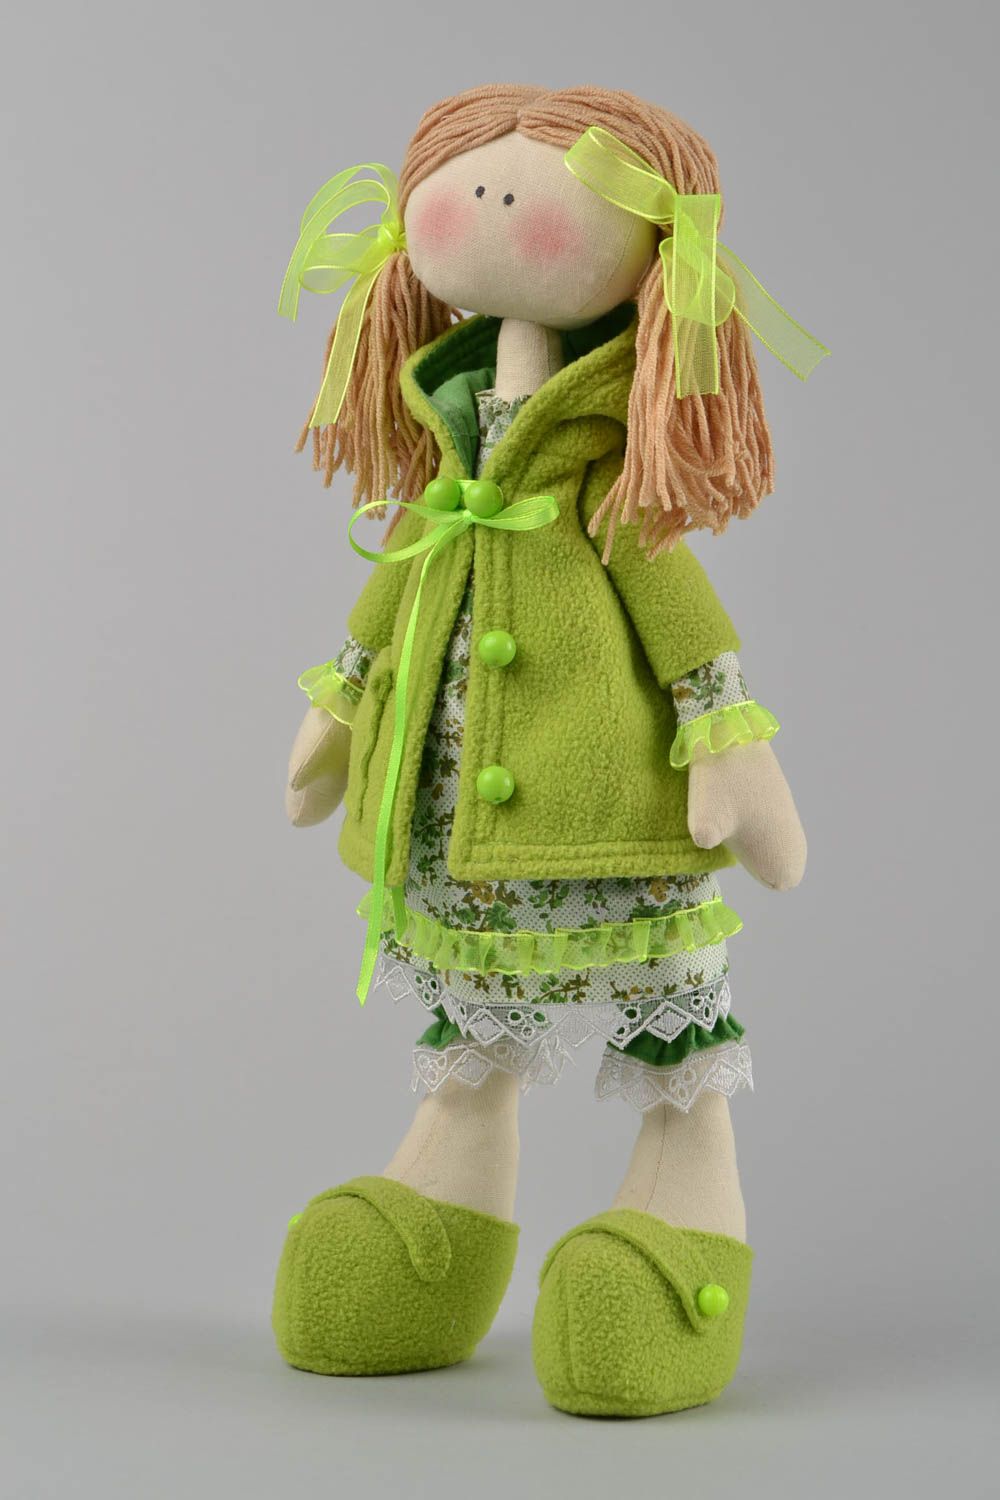 Handmade designer fabric soft doll girl in green clothing with pig tails photo 1